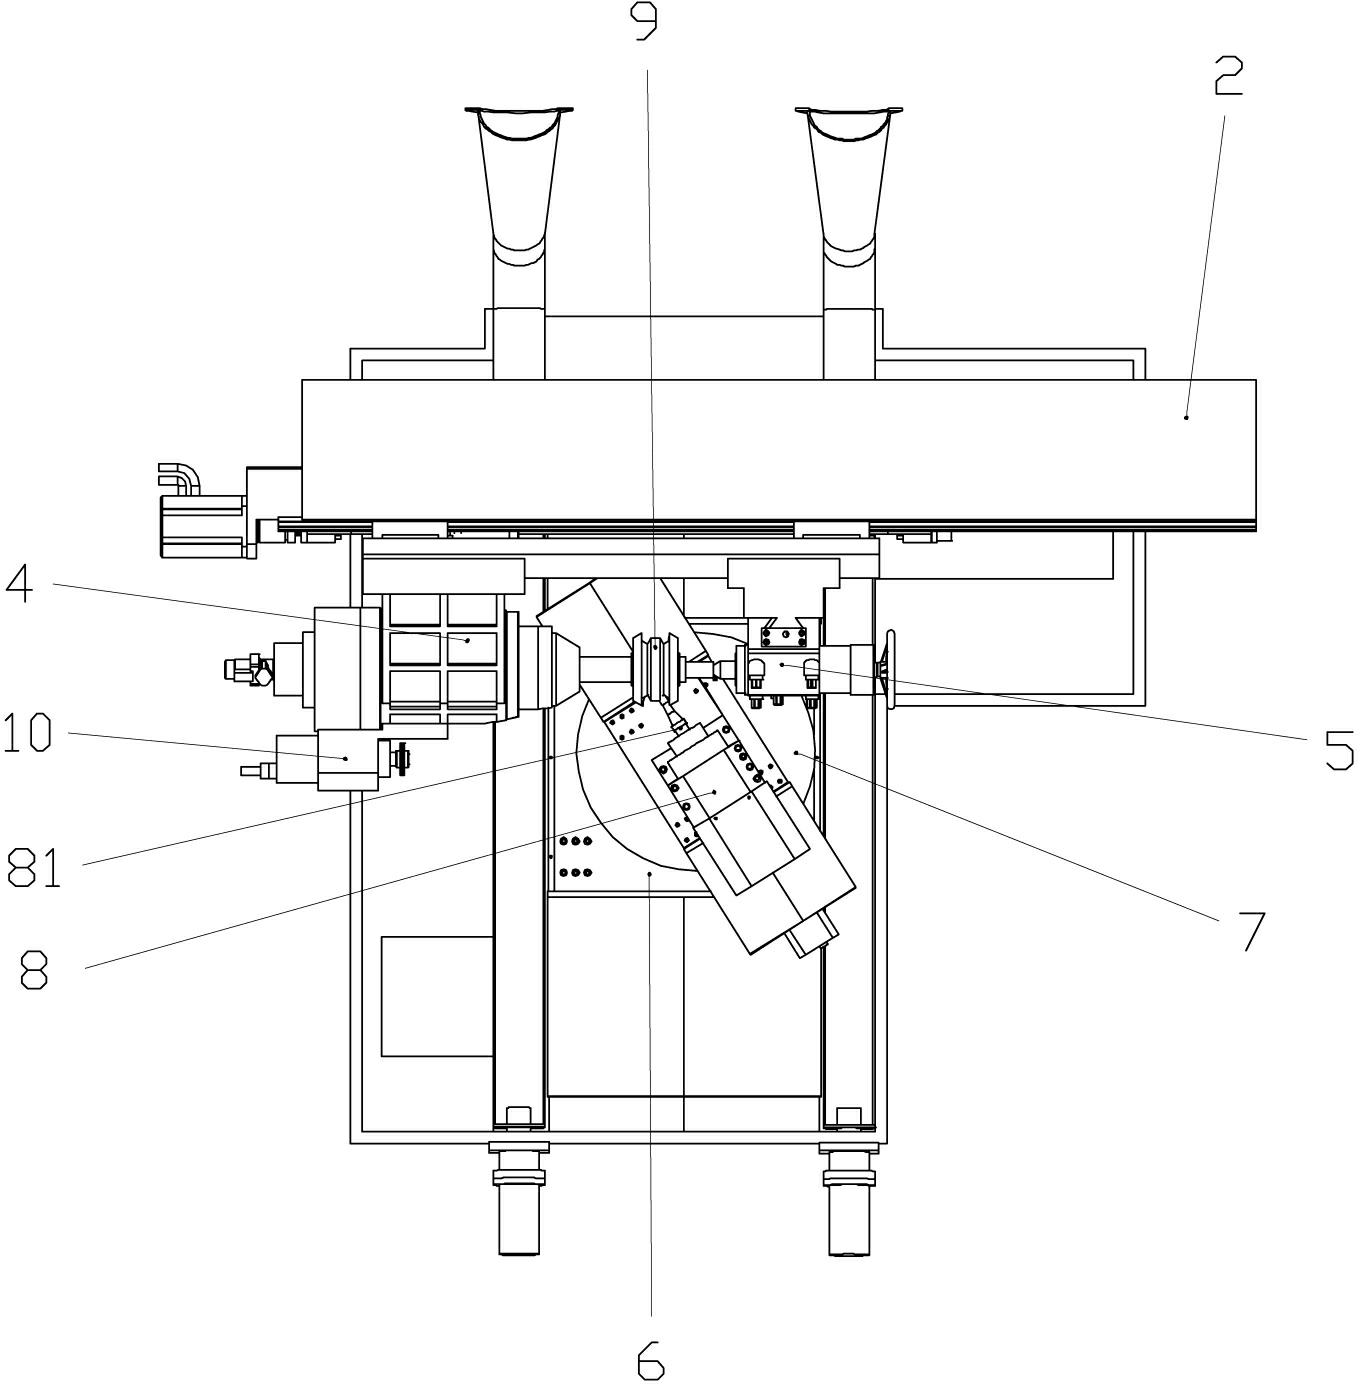 Special numerical-control grinding and milling machine for cams with arc-shaped surfaces